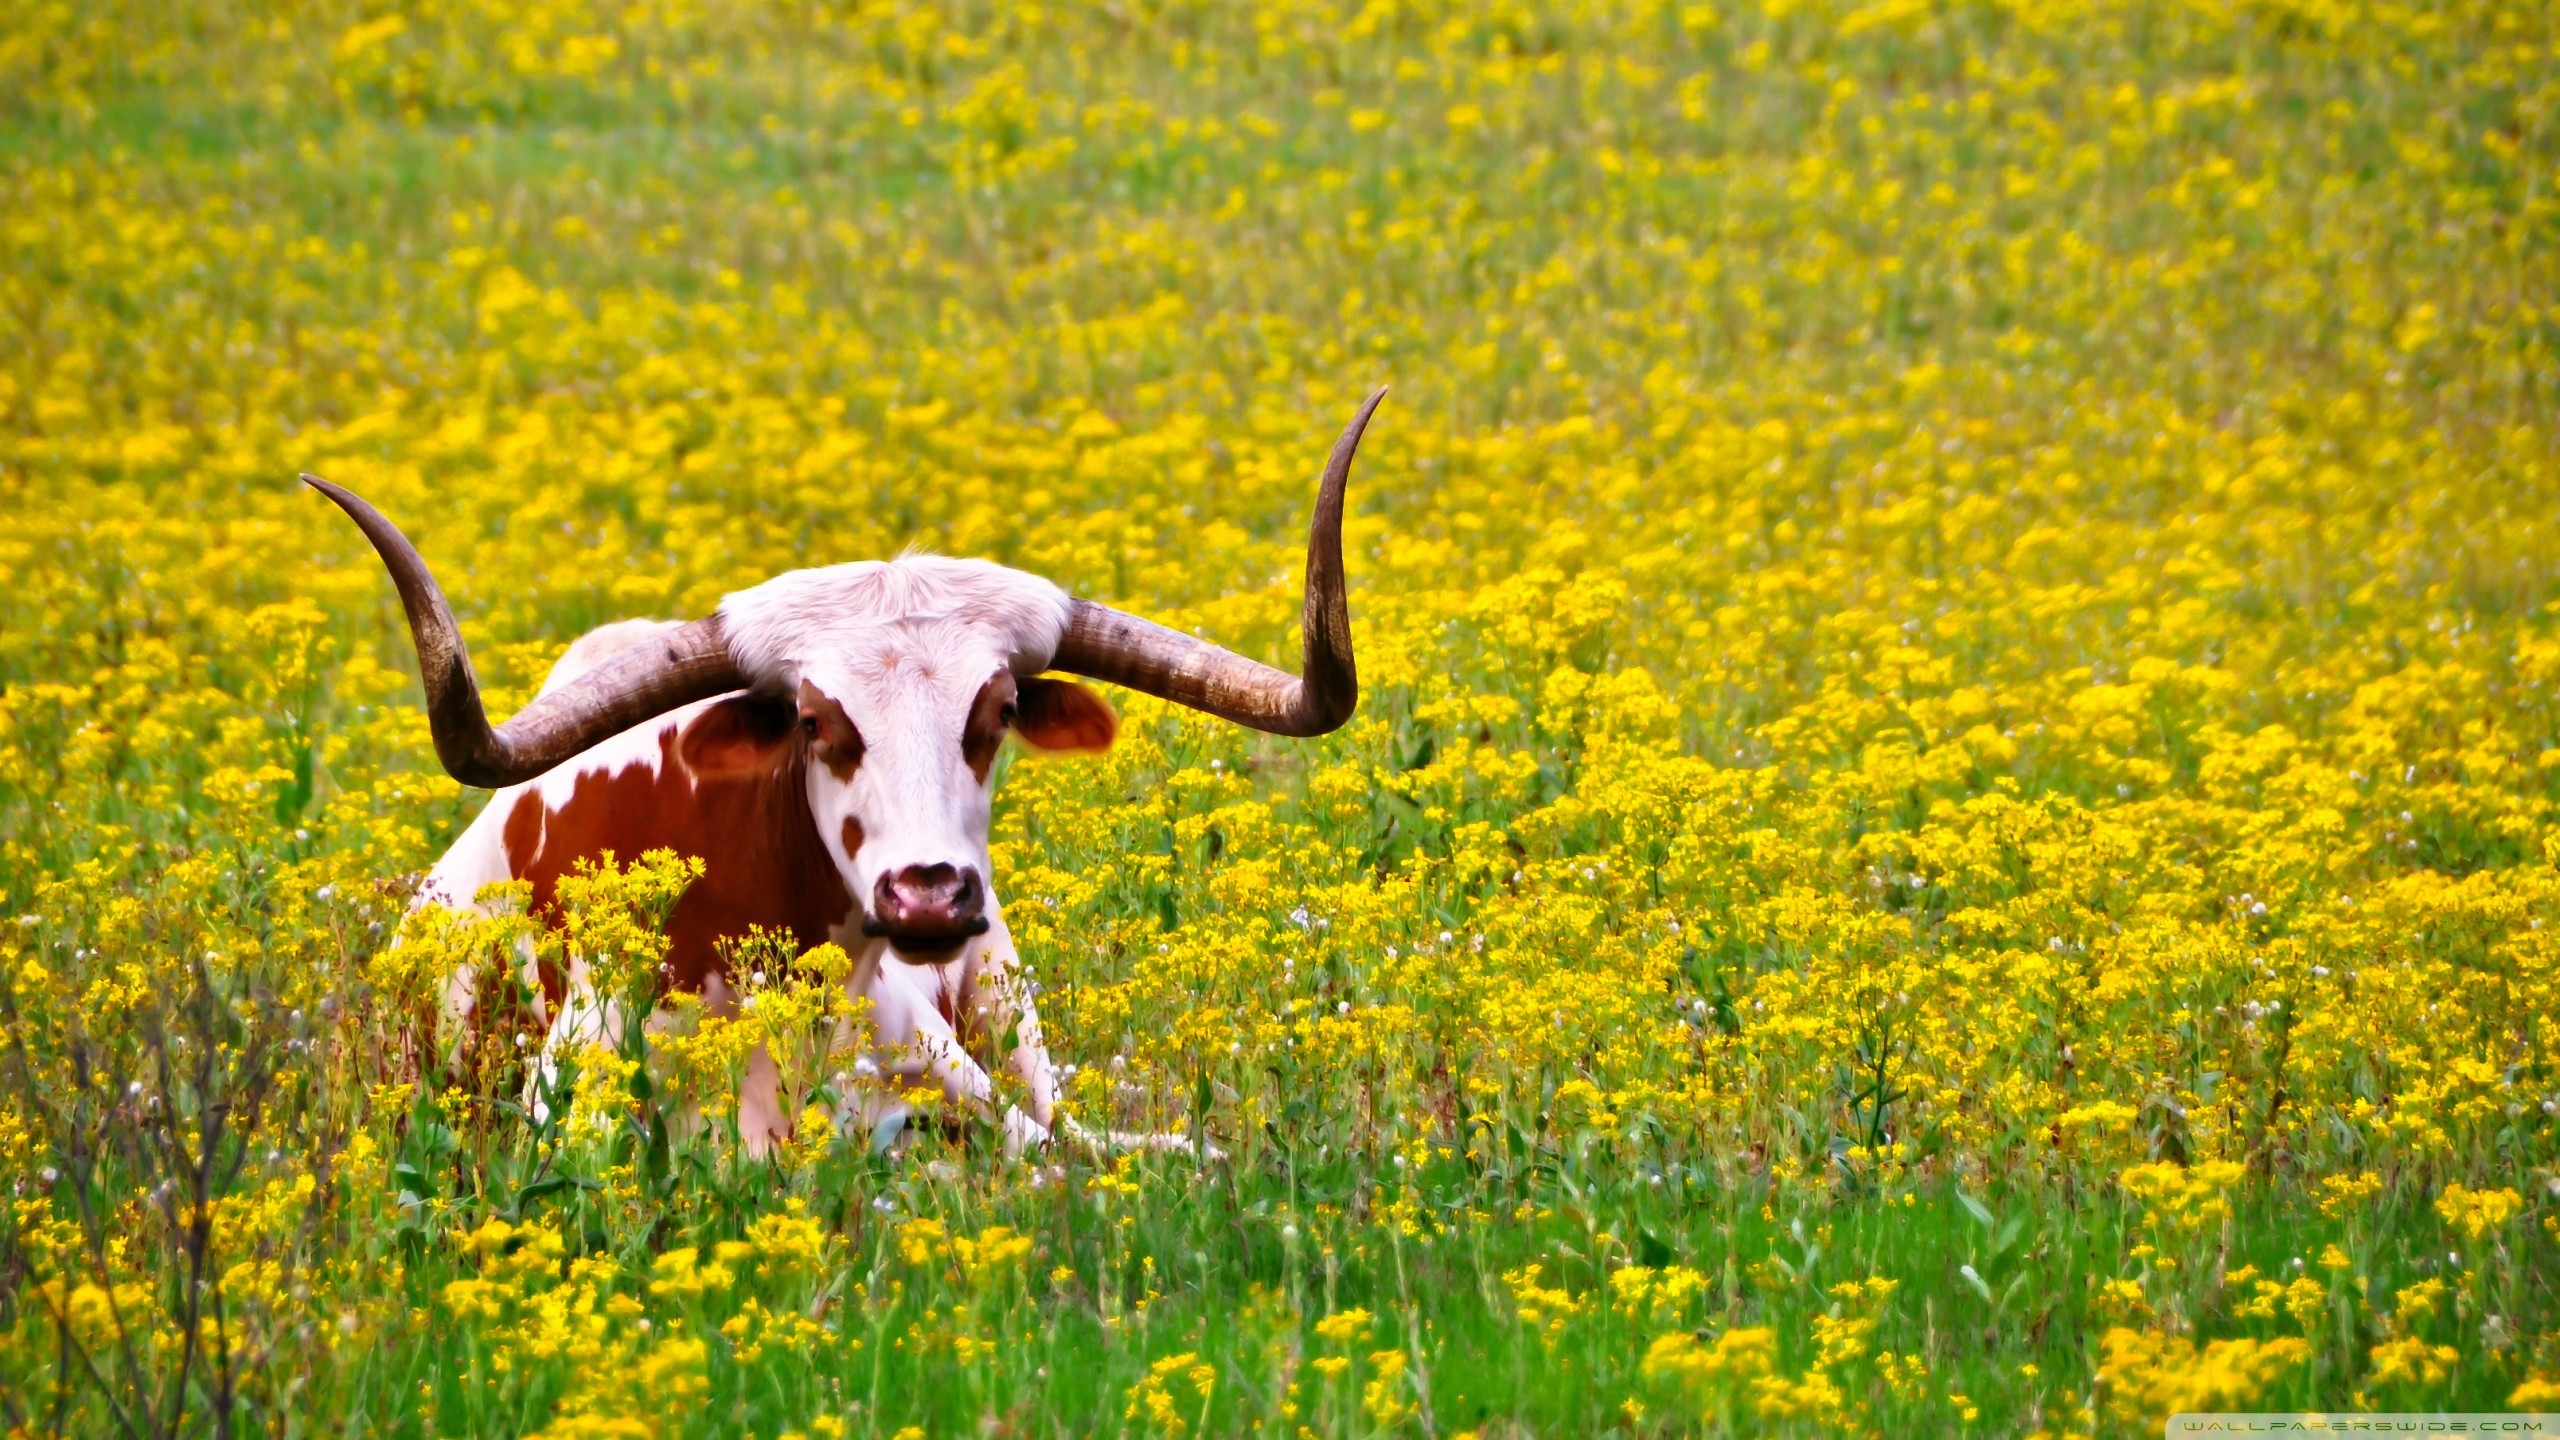 5200 Texas Longhorn Cattle Stock Photos Pictures  RoyaltyFree Images   iStock  Texas hill country Texas ranch Dallas texas